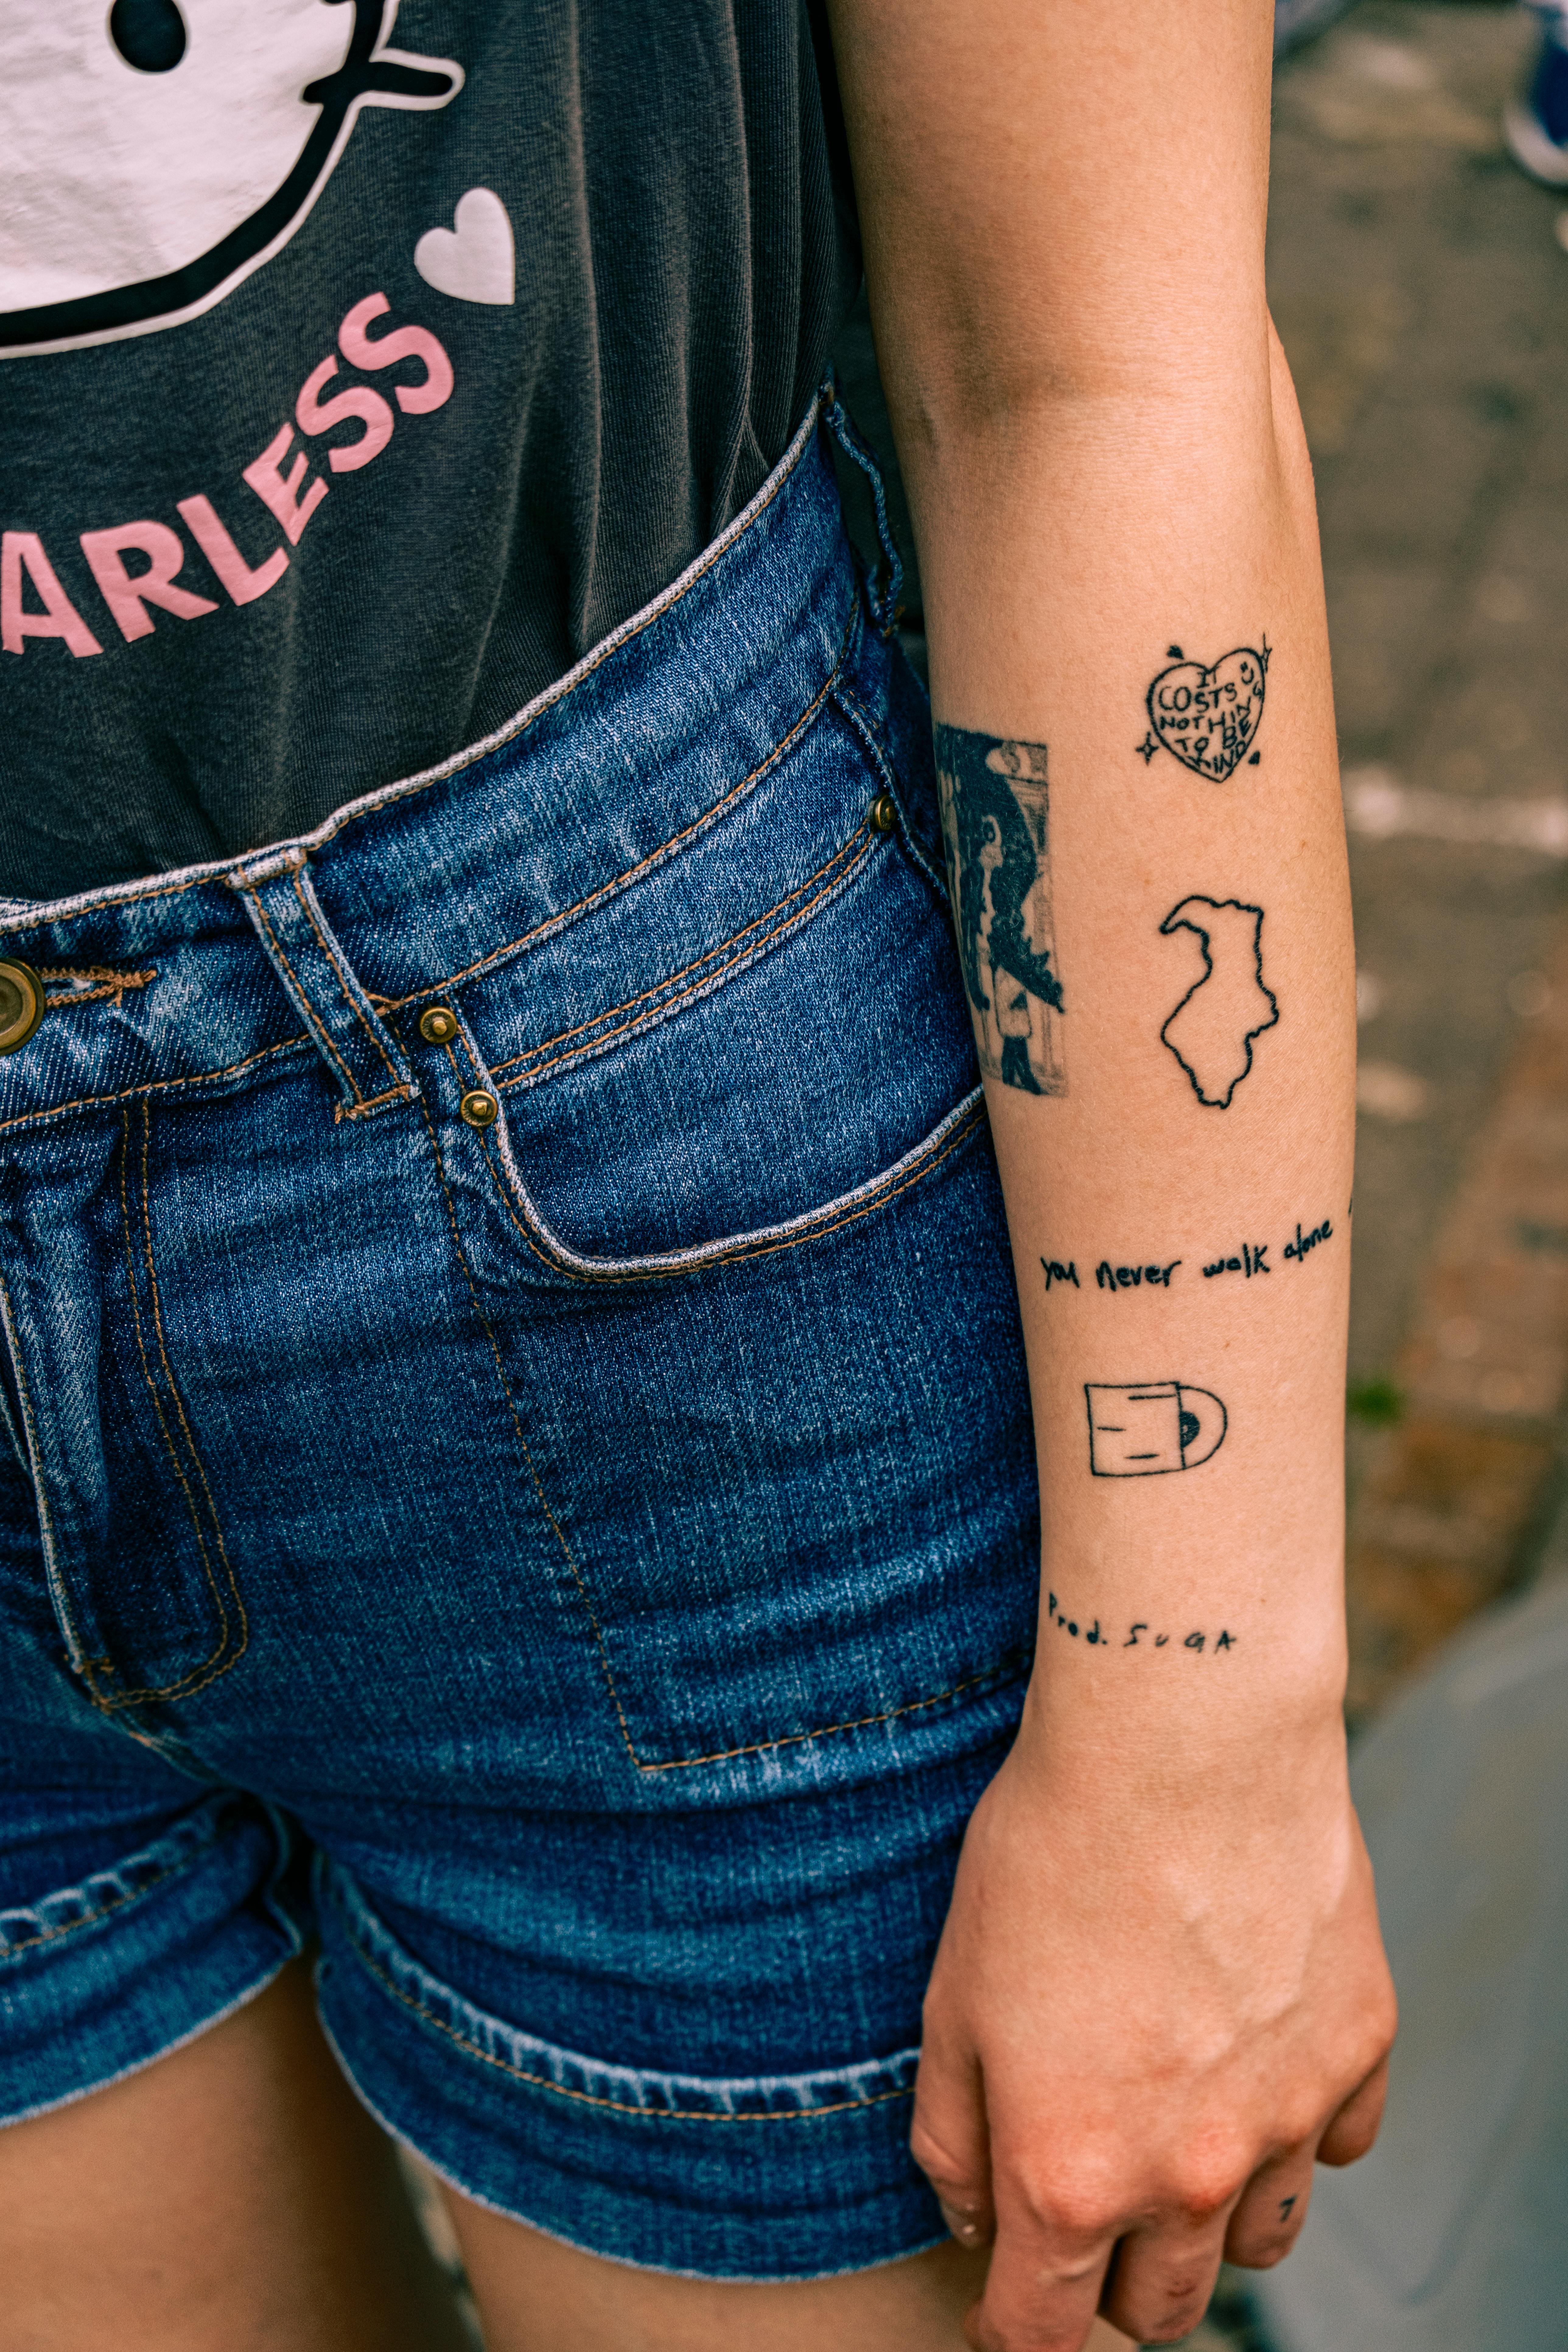 13 Best Friend Tattoos To Get Senior Year So You'll Always Be Connected